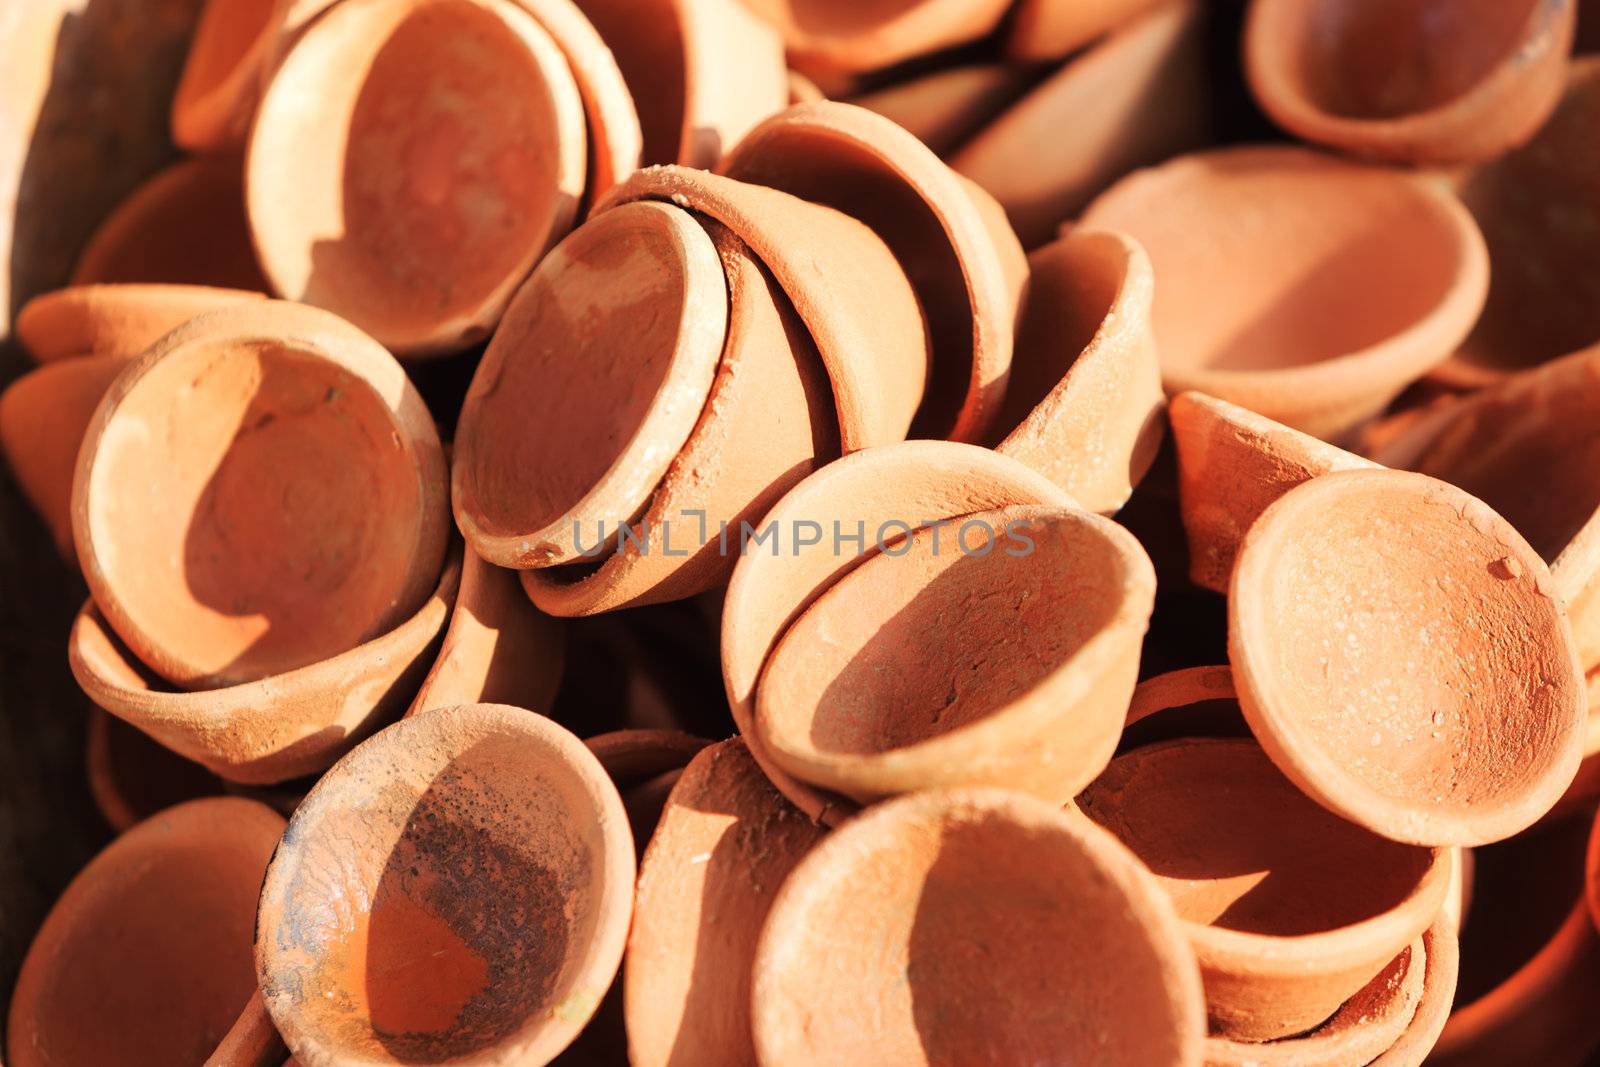 Clay pots for sale. India, Asia. Background